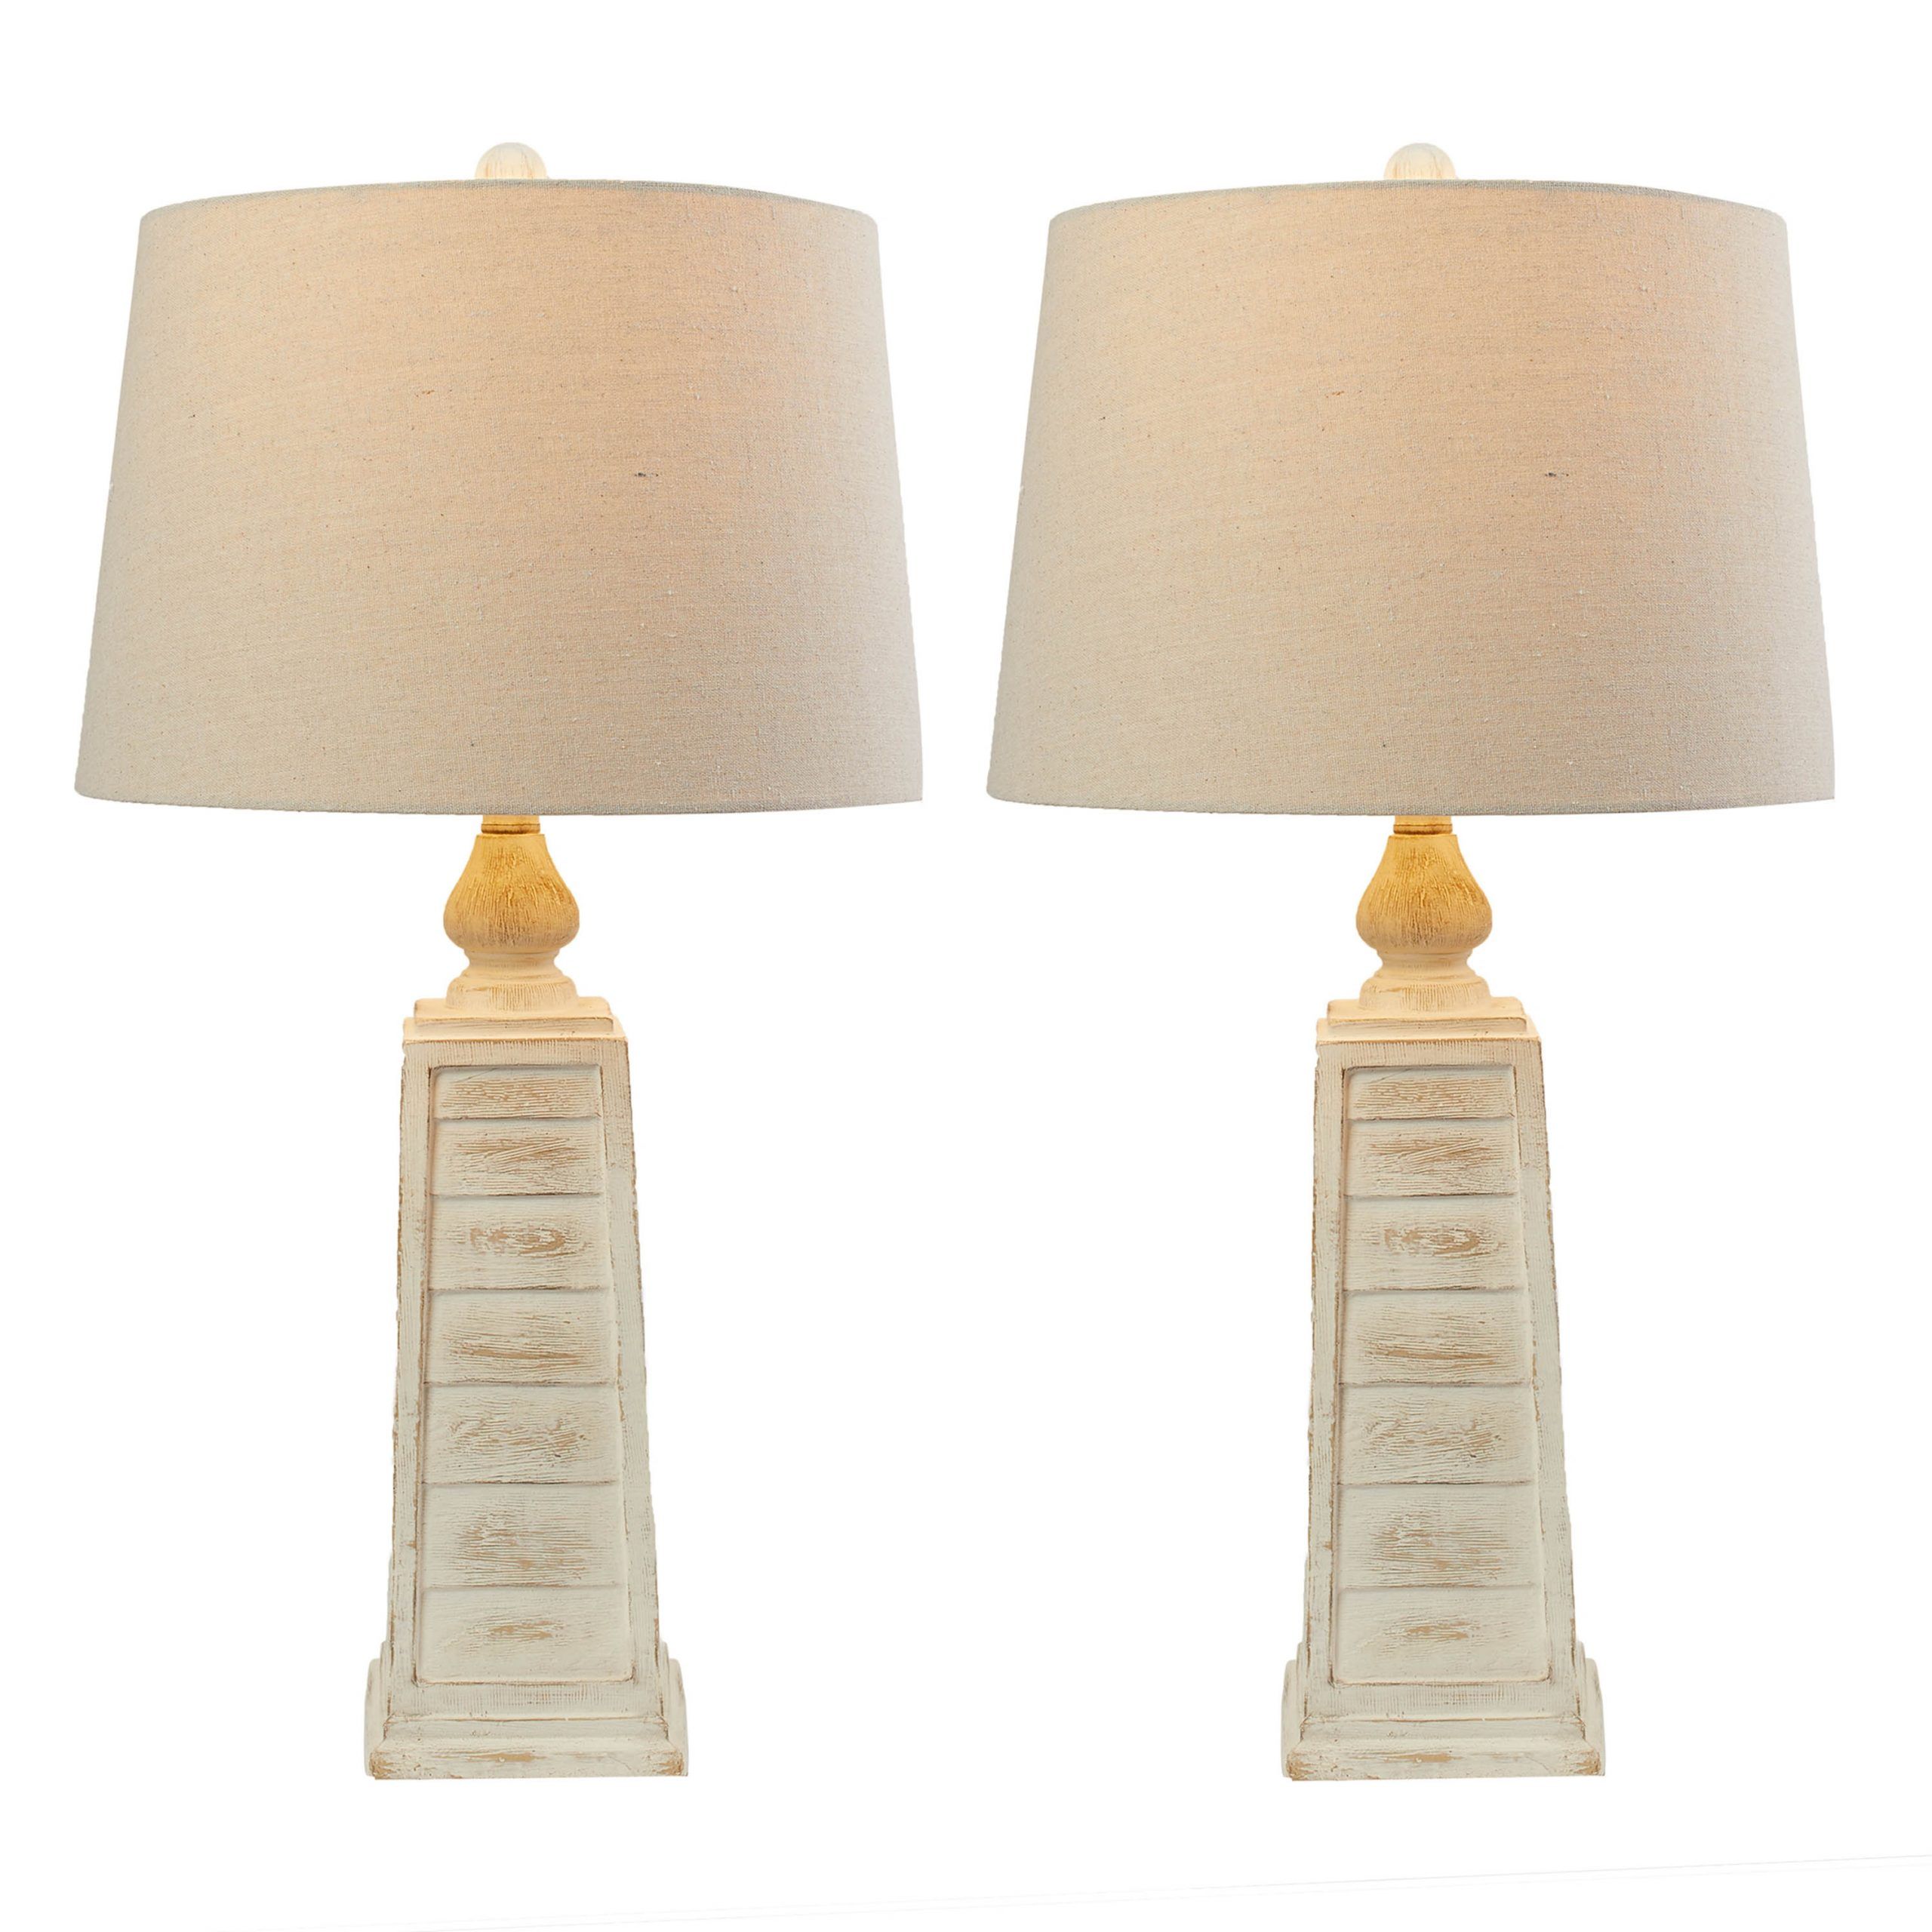 Popular Oatmeal Linen Shade Chandeliers Within Weathered White Resin Table Lamp Oatmeal Linen Hardback (View 2 of 20)